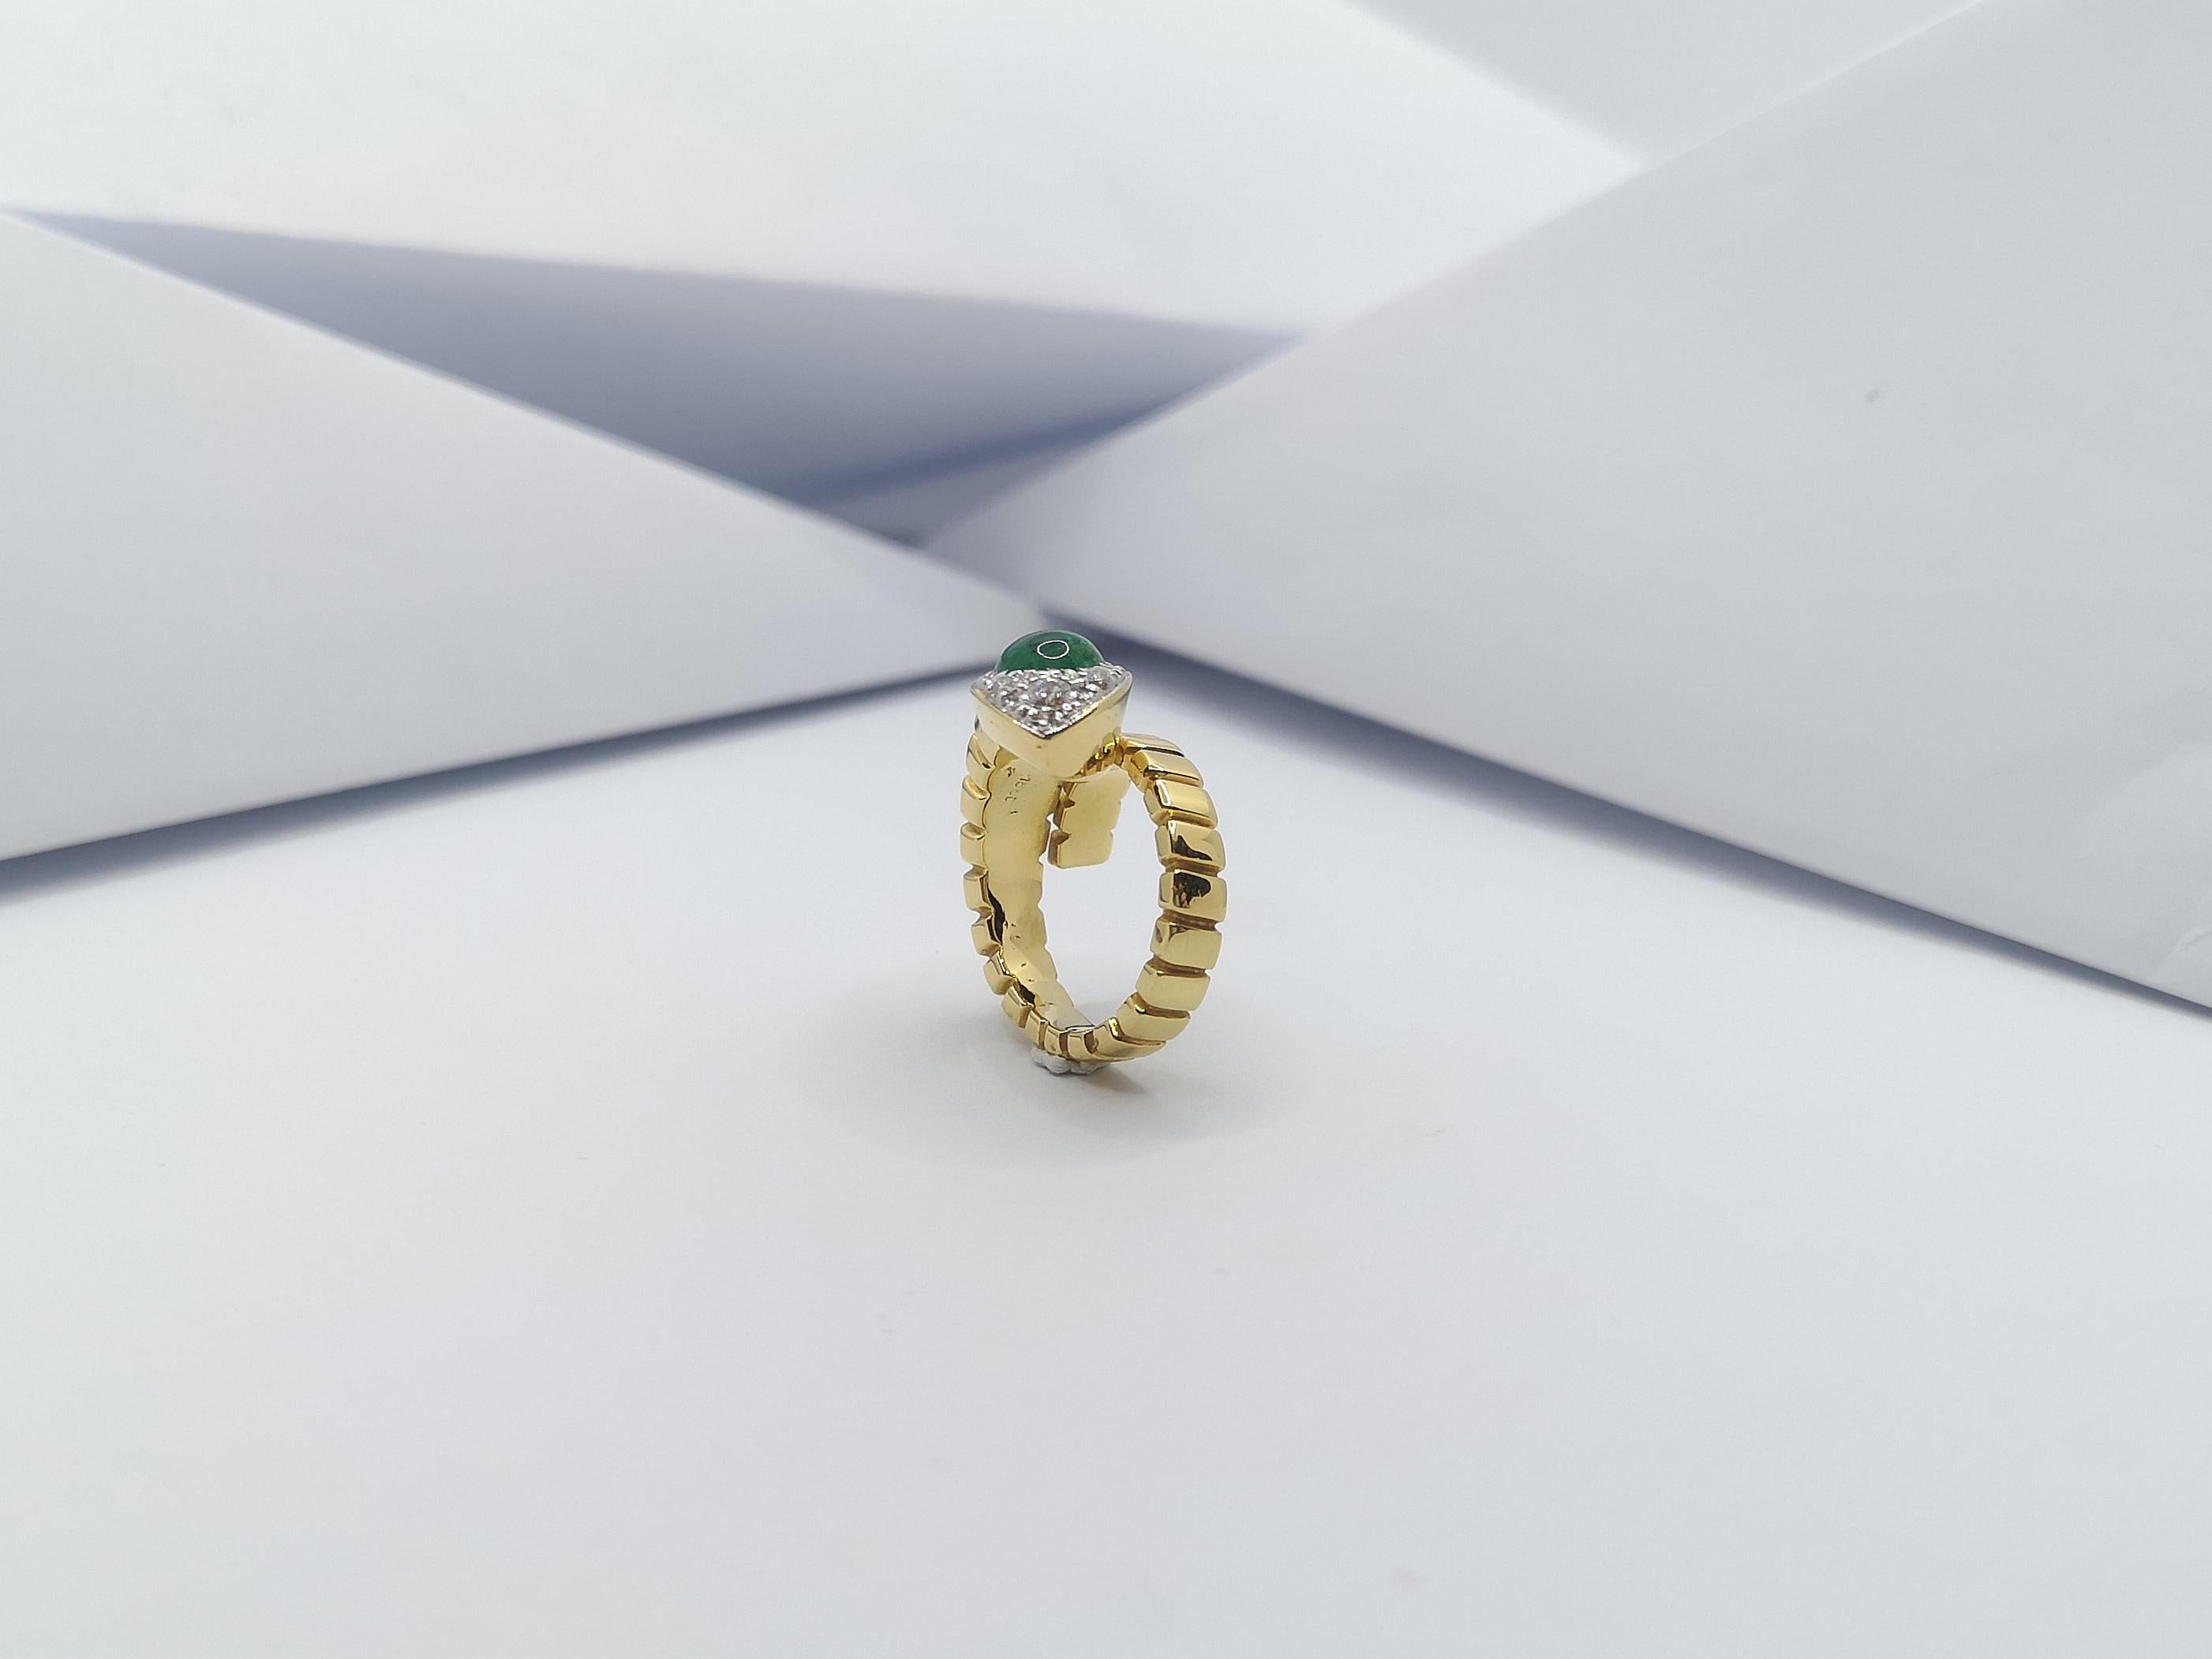 Cabochon Emerald with Diamond Serpent Ring Set in 18 Karat Gold Settings For Sale 5